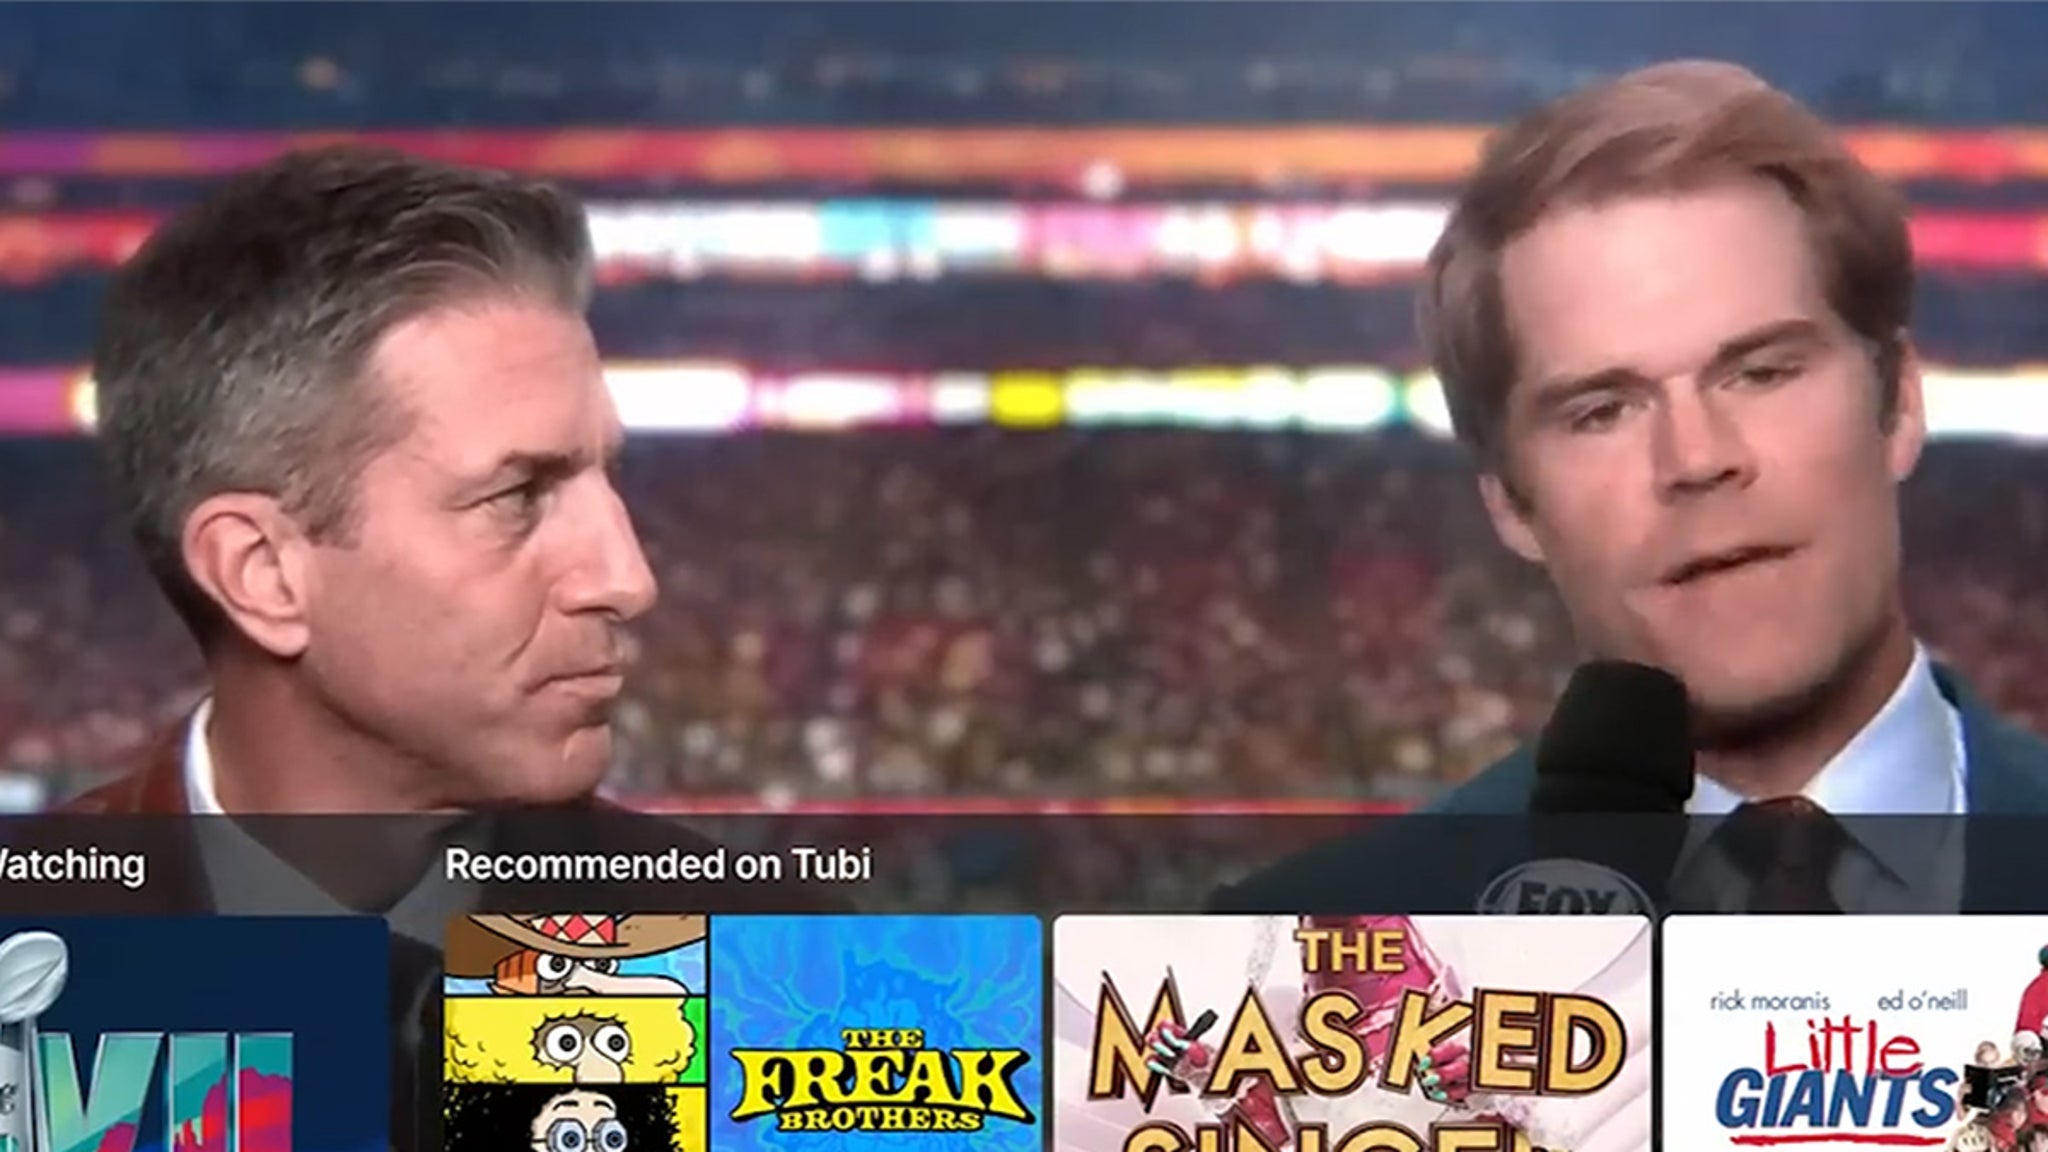 Tubi Super Bowl Commercial Fooled Millions of Fans During Game